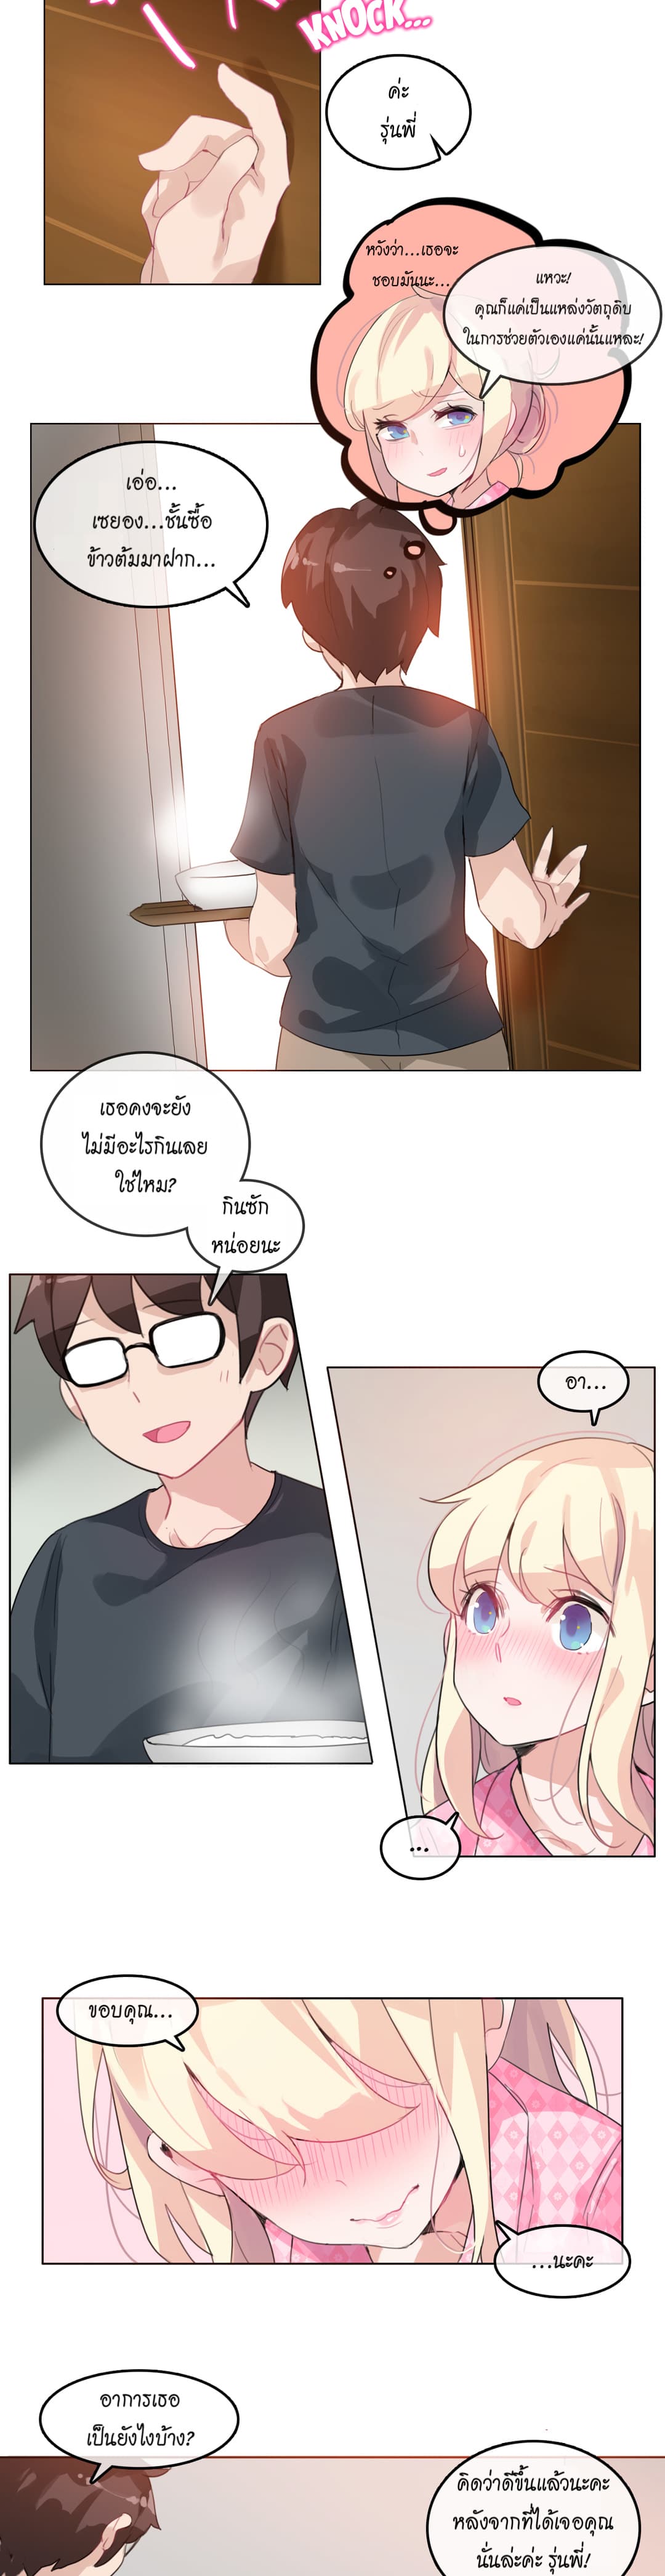 A Pervert’s Daily Life 15 (11)